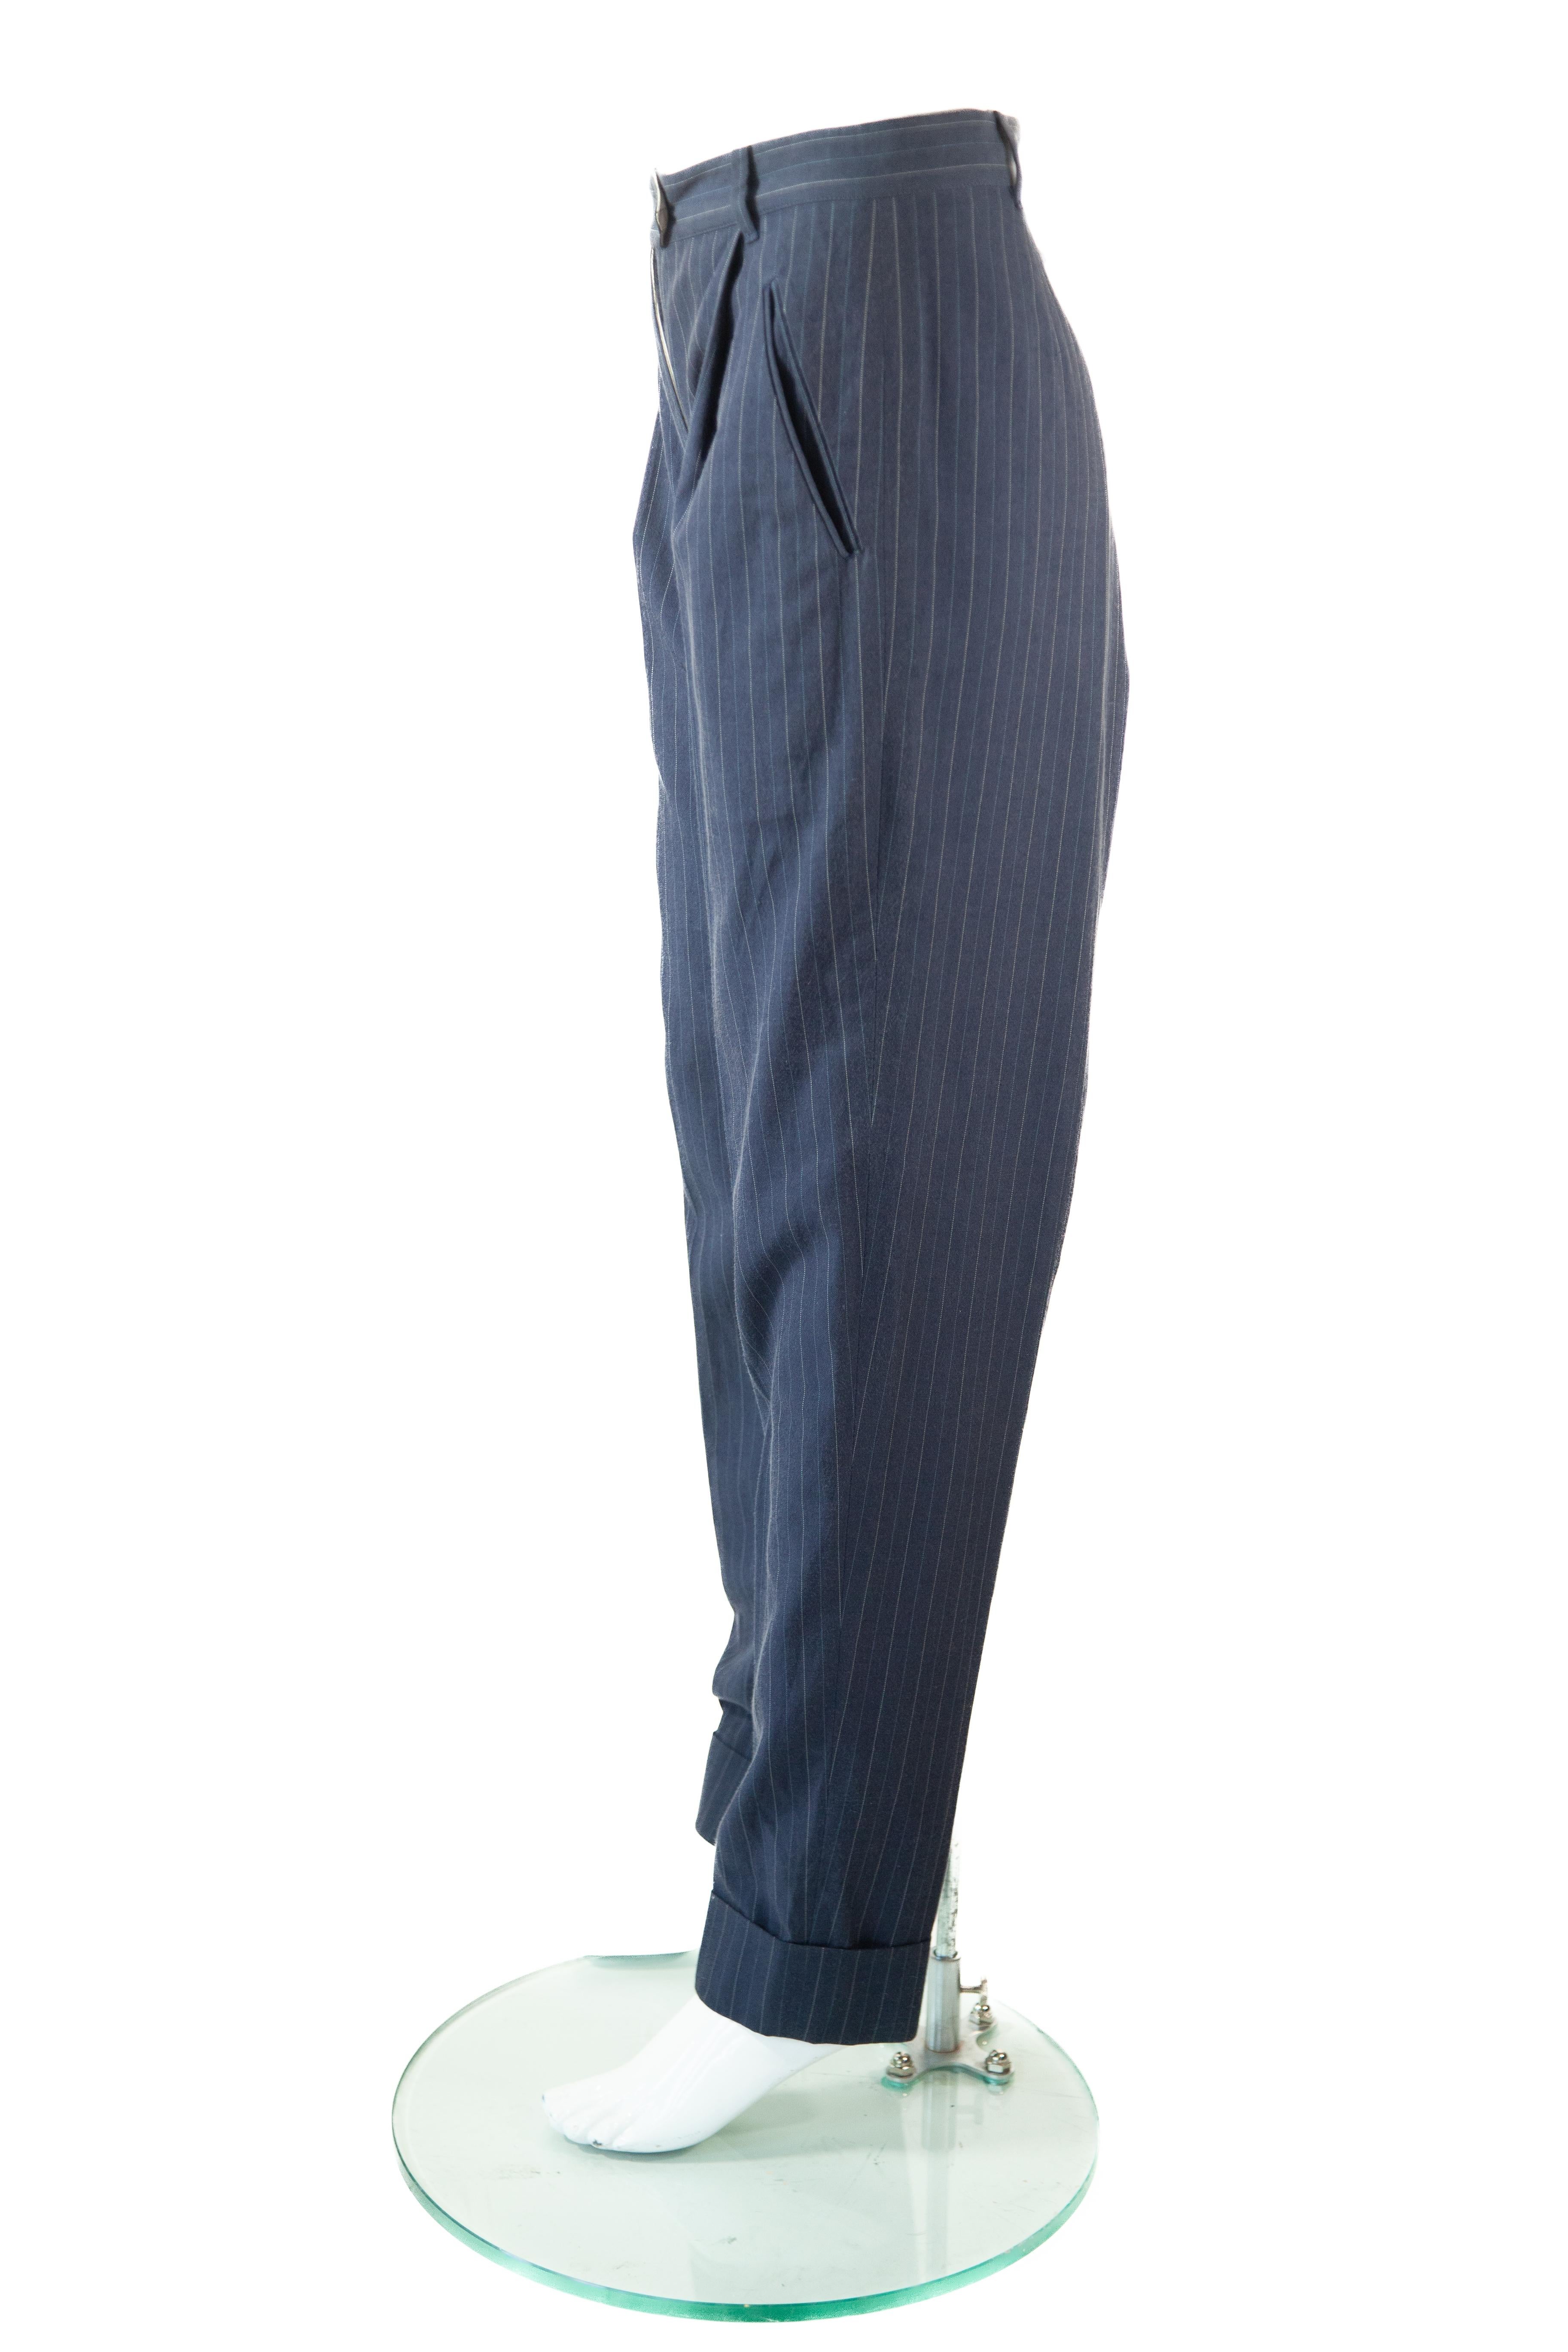 Jean Paul Gaultier navy blue, pin-striped pants with button seems on inner seams of pant that converts into a long skirt

Sz 42

